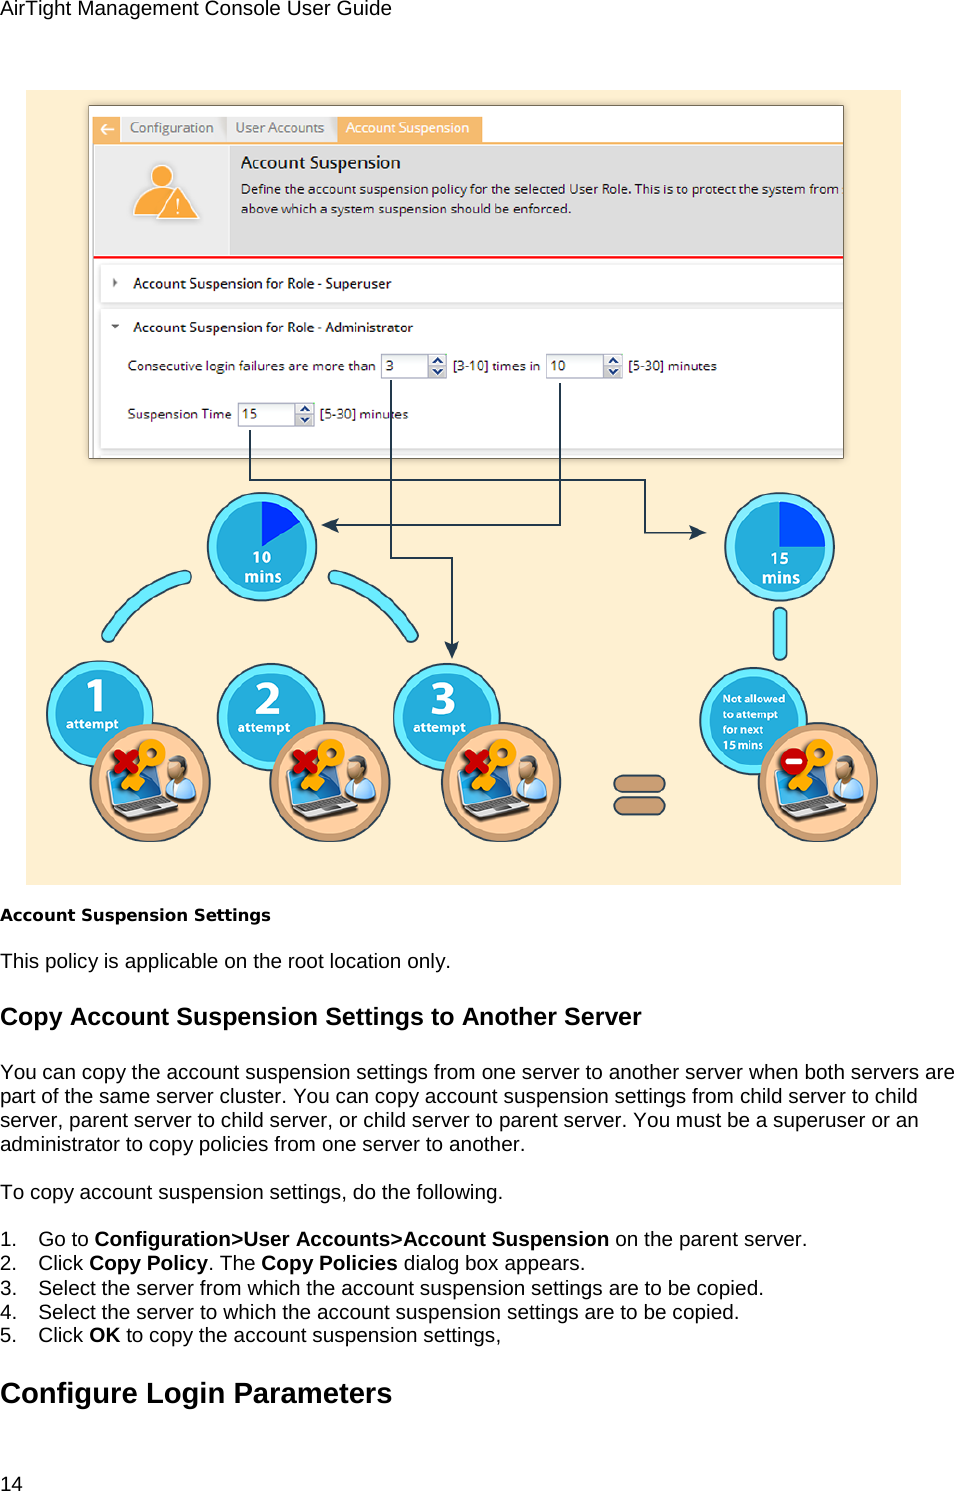 AirTight Management Console User Guide 14  Account Suspension Settings   This policy is applicable on the root location only. Copy Account Suspension Settings to Another Server You can copy the account suspension settings from one server to another server when both servers are part of the same server cluster. You can copy account suspension settings from child server to child server, parent server to child server, or child server to parent server. You must be a superuser or an administrator to copy policies from one server to another.   To copy account suspension settings, do the following.   1.      Go to Configuration&gt;User Accounts&gt;Account Suspension on the parent server. 2.      Click Copy Policy. The Copy Policies dialog box appears. 3.      Select the server from which the account suspension settings are to be copied. 4.      Select the server to which the account suspension settings are to be copied. 5.      Click OK to copy the account suspension settings, Configure Login Parameters  